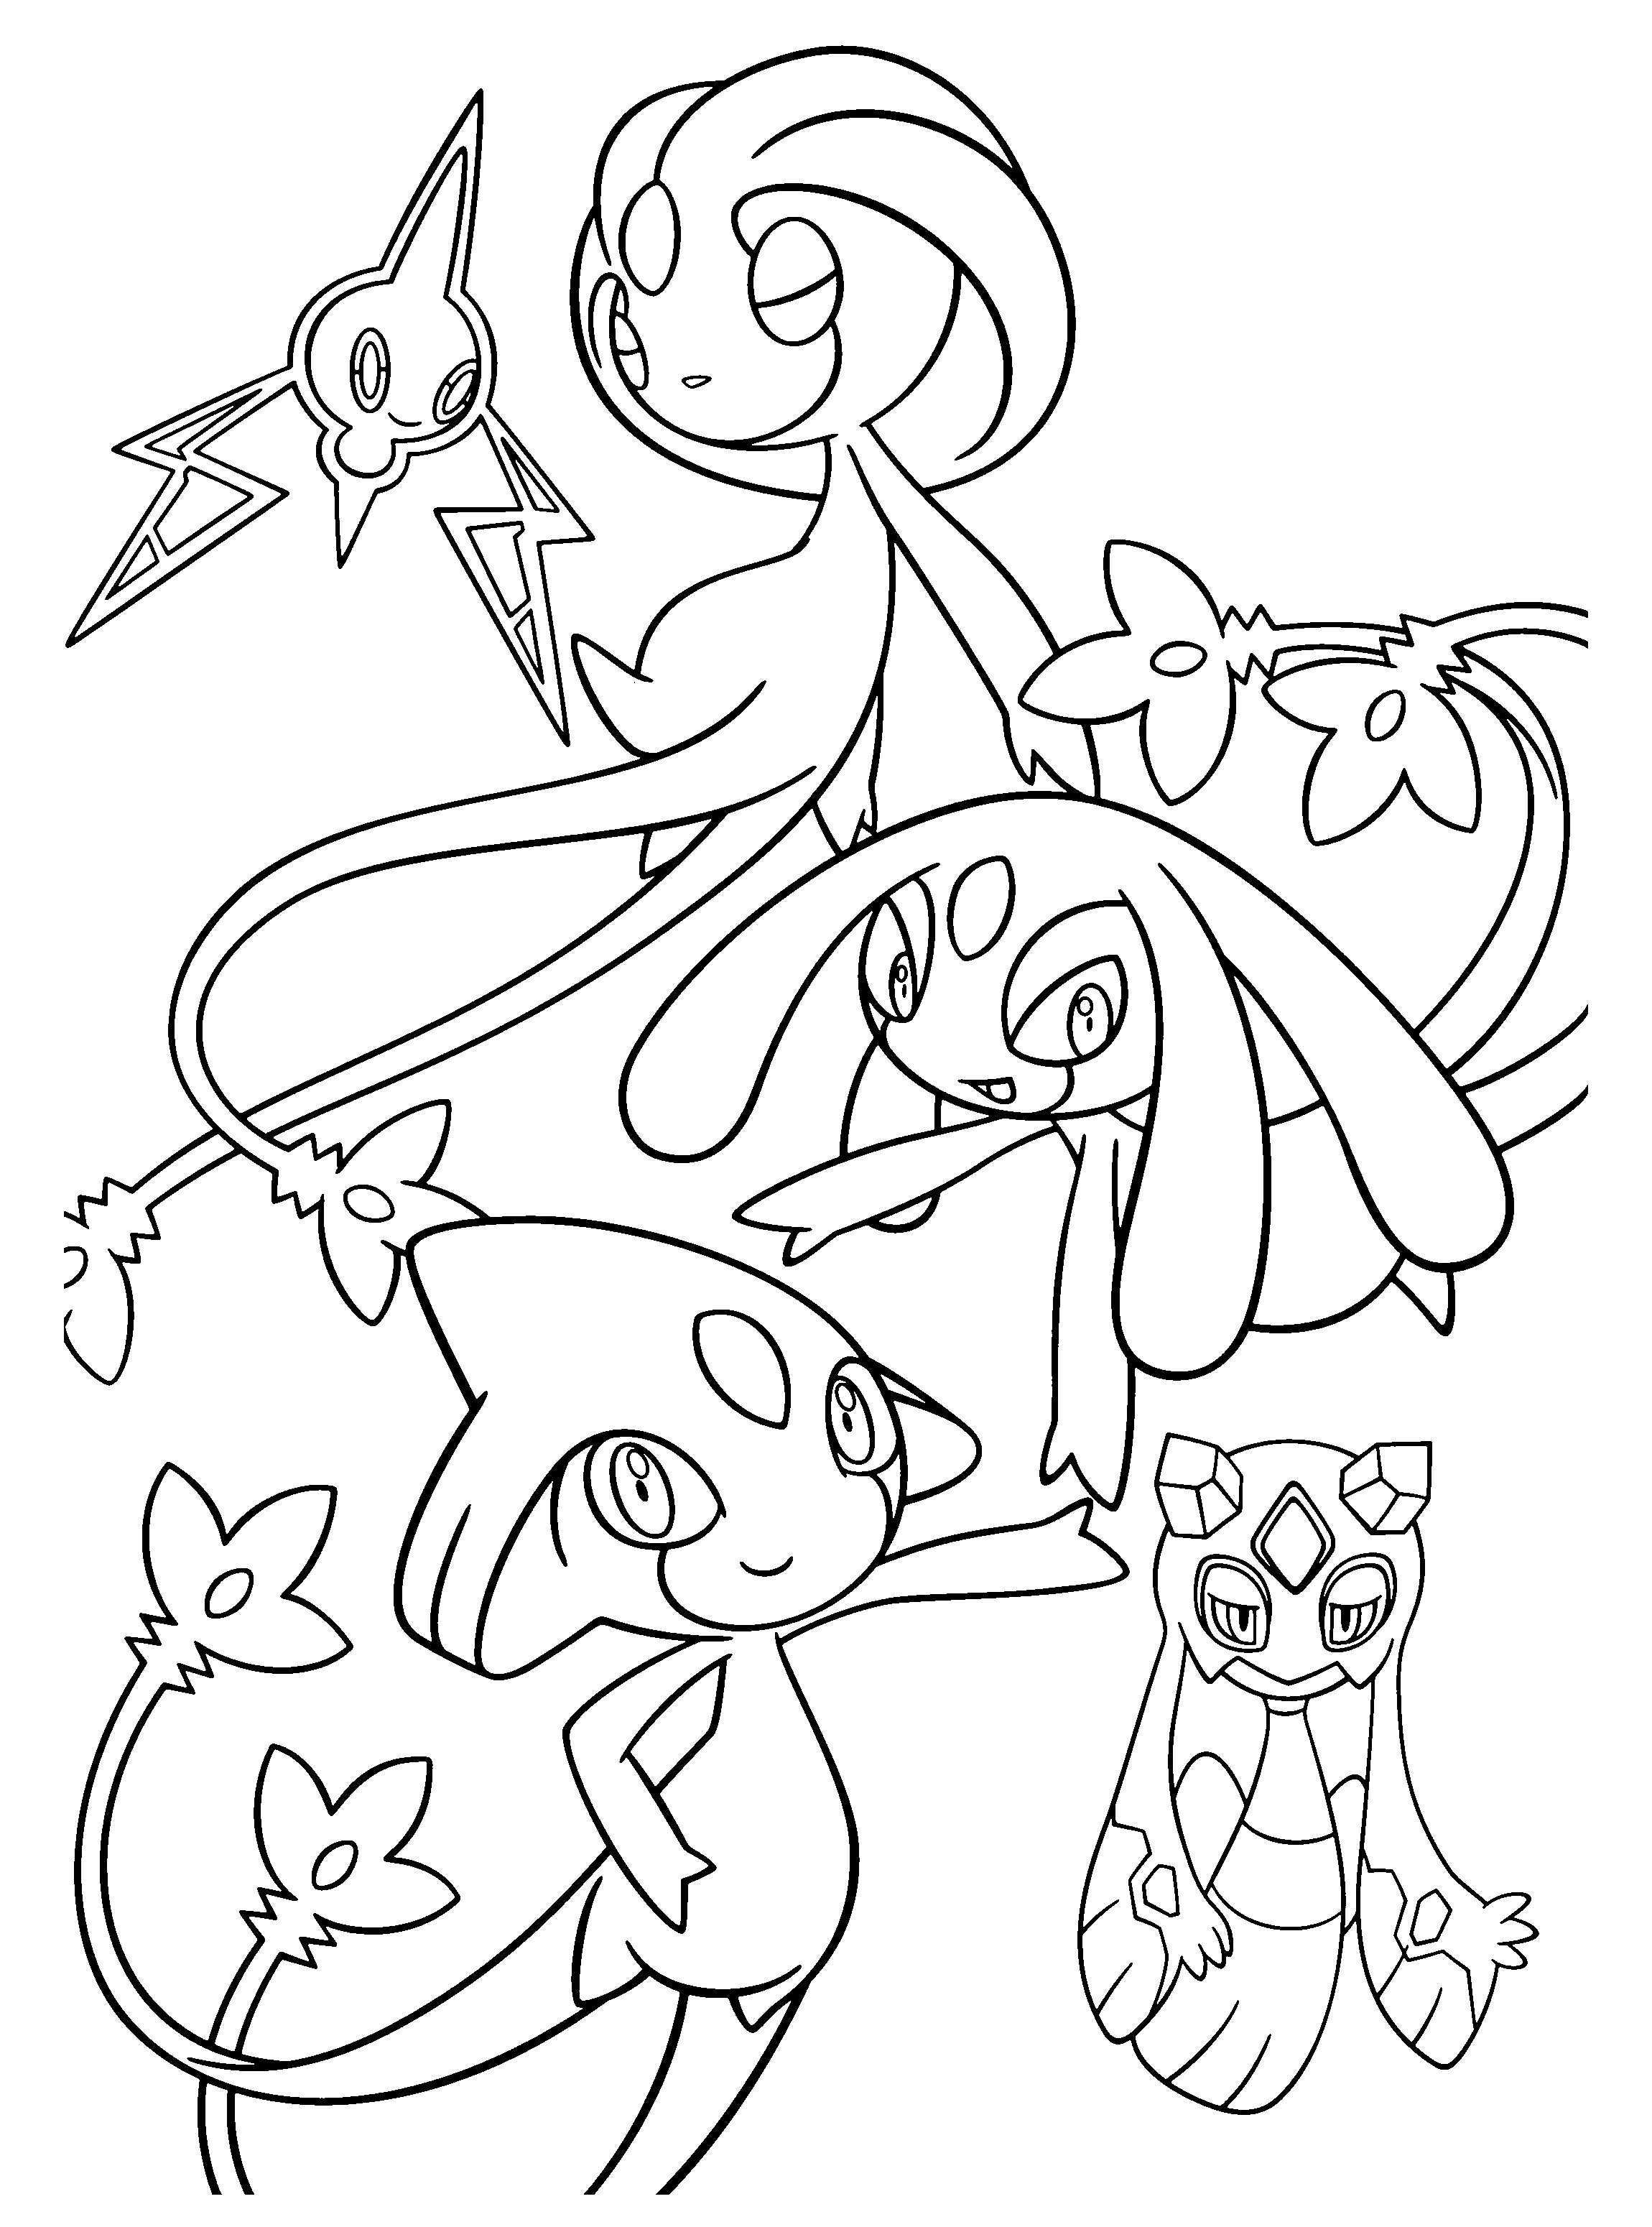 Old Fashioned Pokemon Mesprit Azelf And Uxie Coloring Pages Sketch